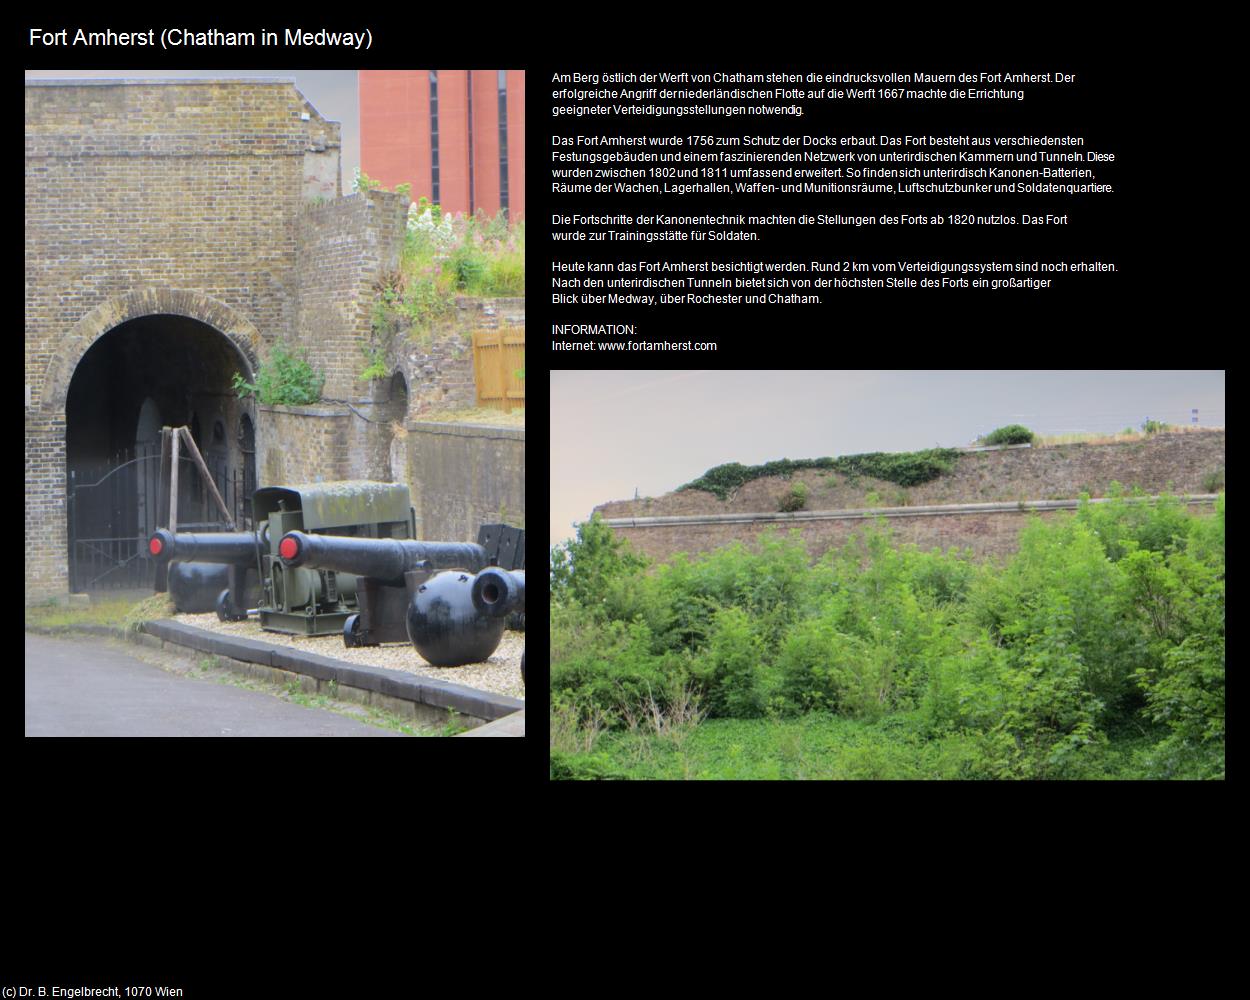 Fort Amherst (Chatham in Medway, England) in Kulturatlas-ENGLAND und WALES